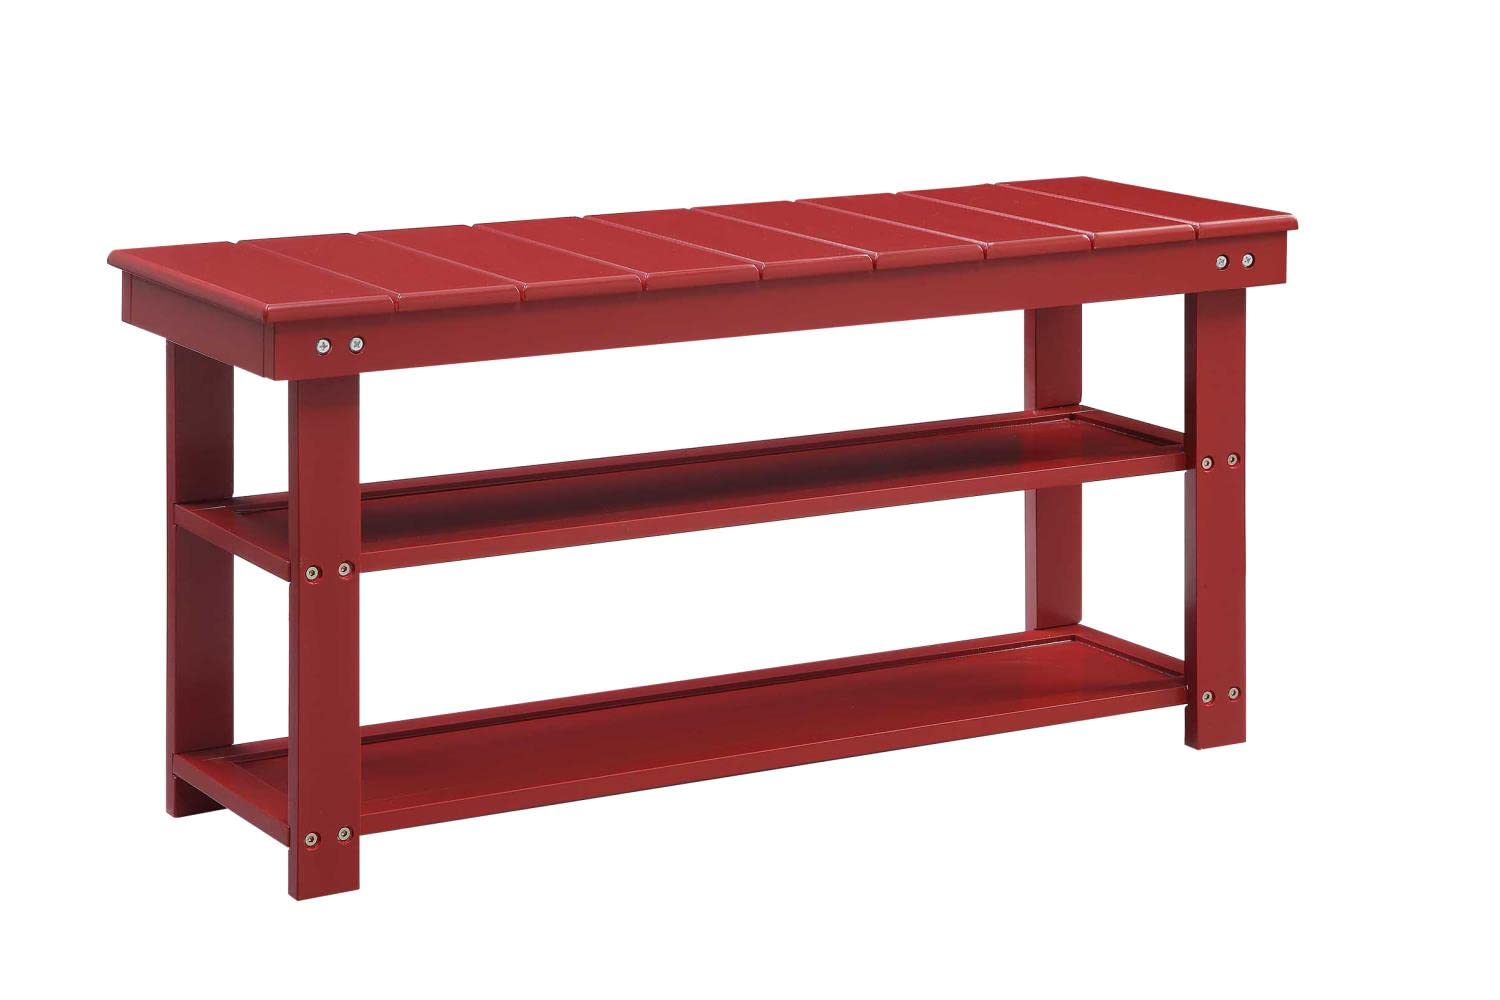 Convenience Concepts 203300CR Oxford Utility Mudroom Bench, Cranberry Red - 35 x 12 x 17 in.